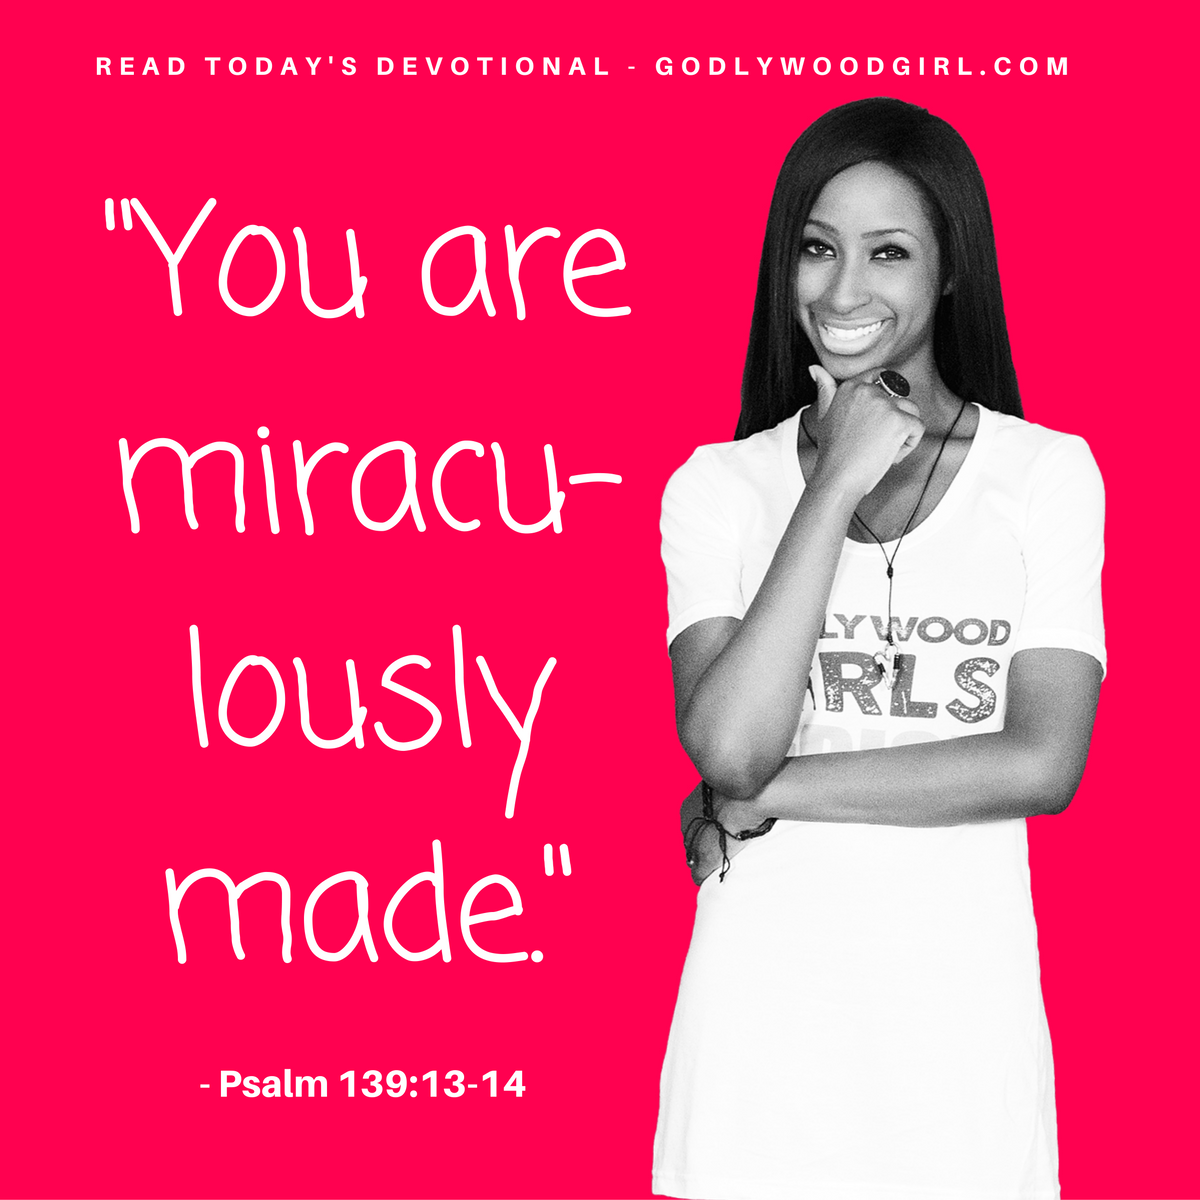 Today's Daily Devotional For Women - You are miraculously made.